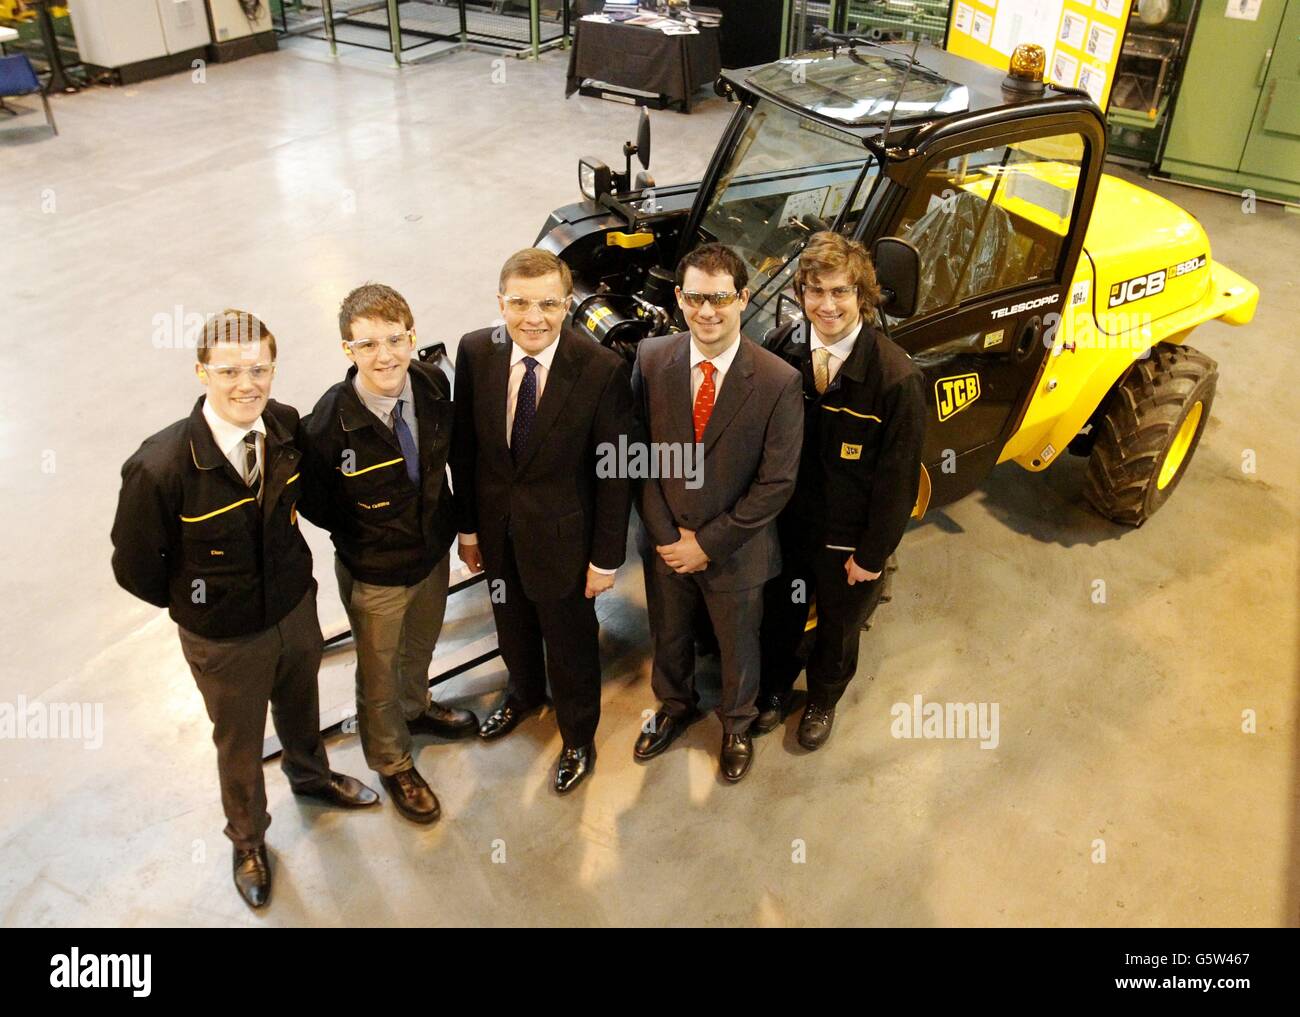 (R-L) Matthew Brooks (graduate engineer), Marco Olozabal (graduate engineer), Welsh Secretary David Jones (centre) Connor Griffiths (apprentice) and Daniel Biggs (apprentice) during a visit to JCB, in Wrexham, North Wales. Mr Jones was visiting the region to see the role the industry has to play in the growth and rebalancing of the economy. Stock Photo